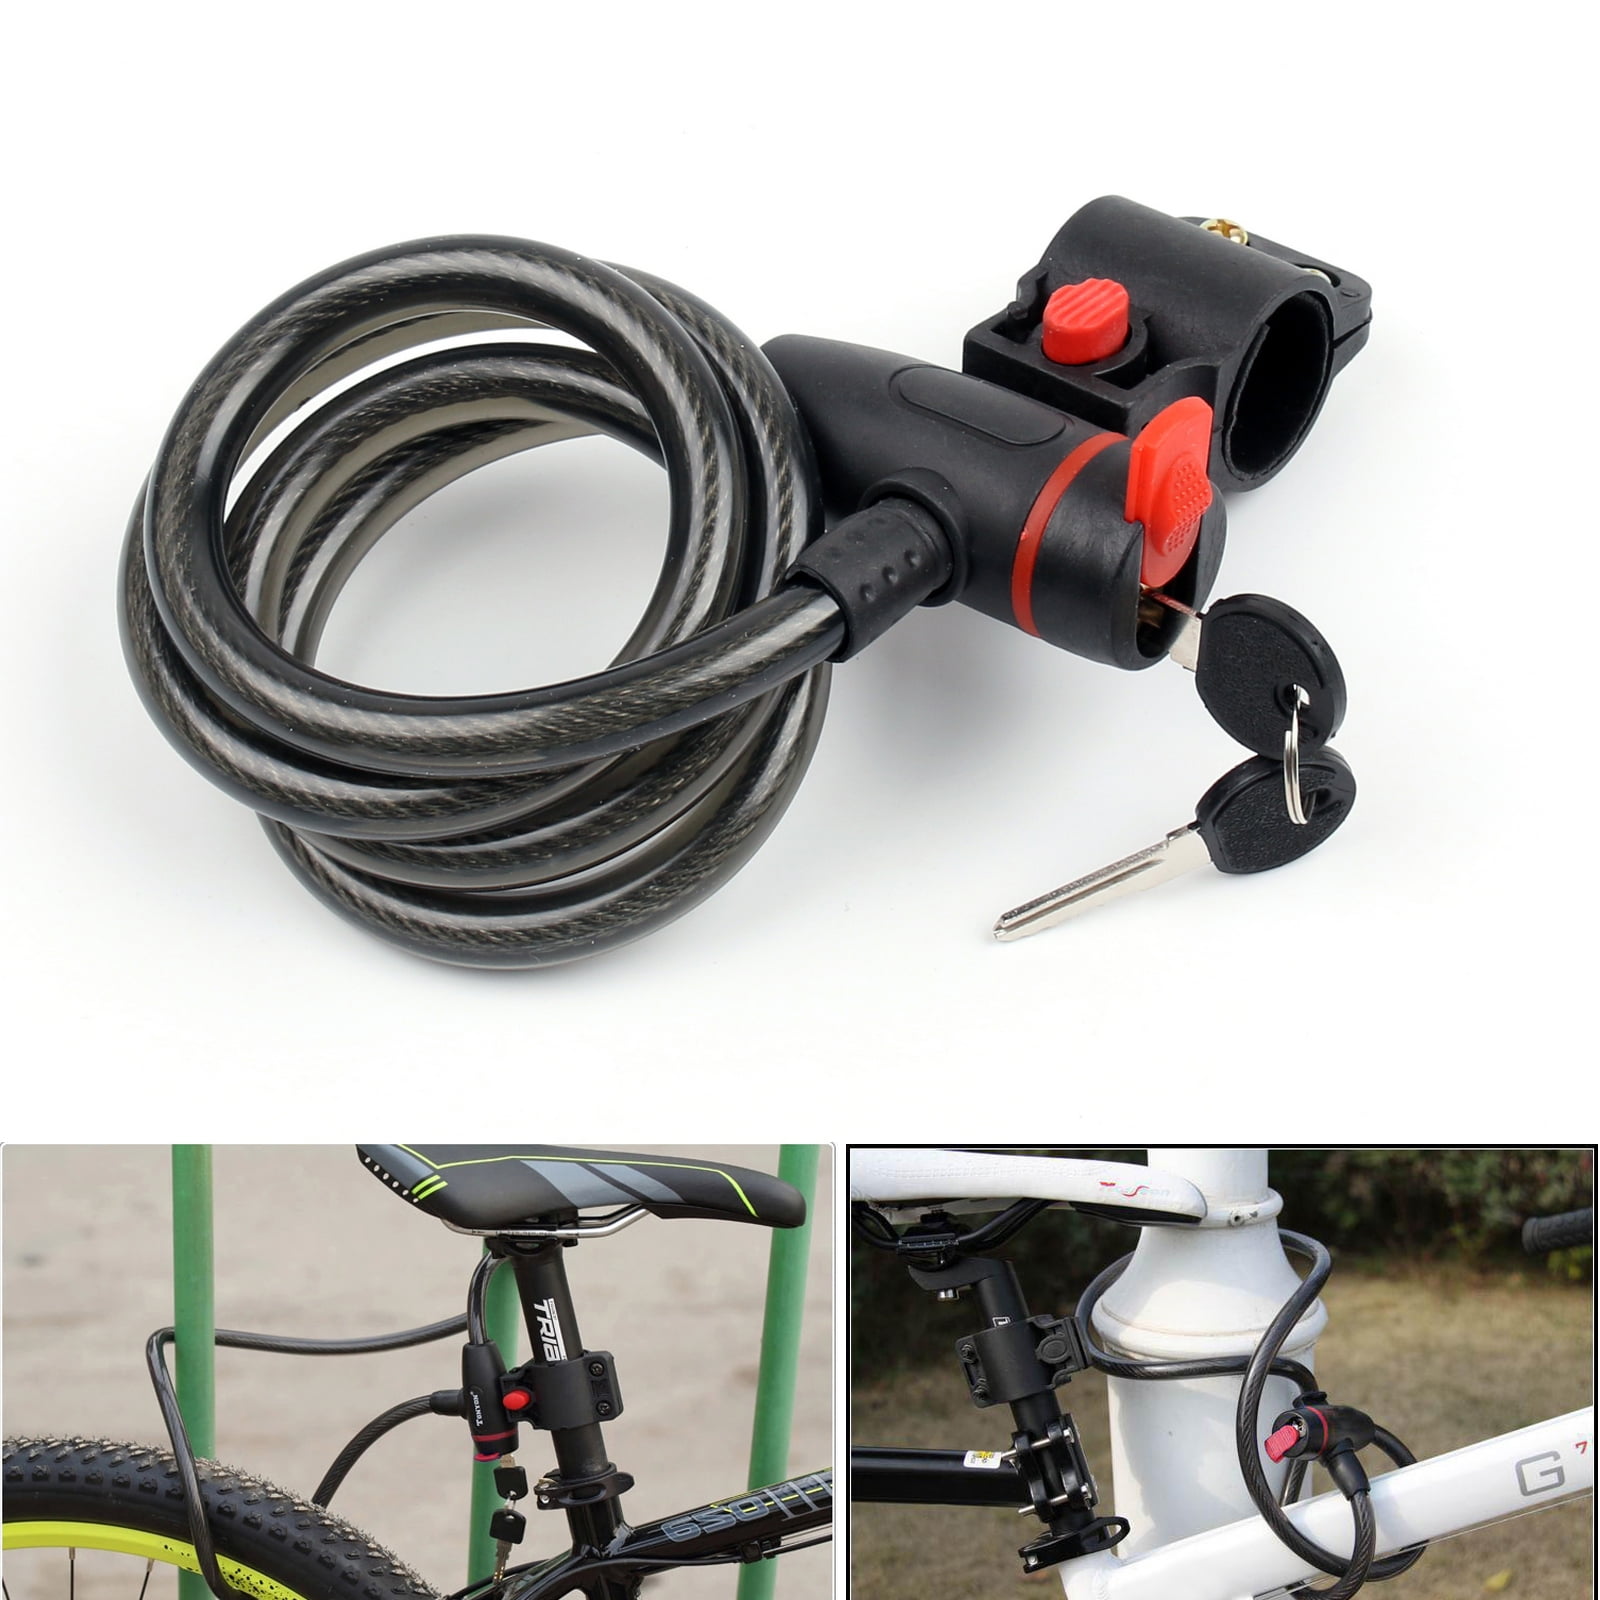 BLUE BICYCLE CYCLE BIKE HEAVY DUTY SPIRAL STEEL CABLE SECURITY LOCK 2 KEYS 